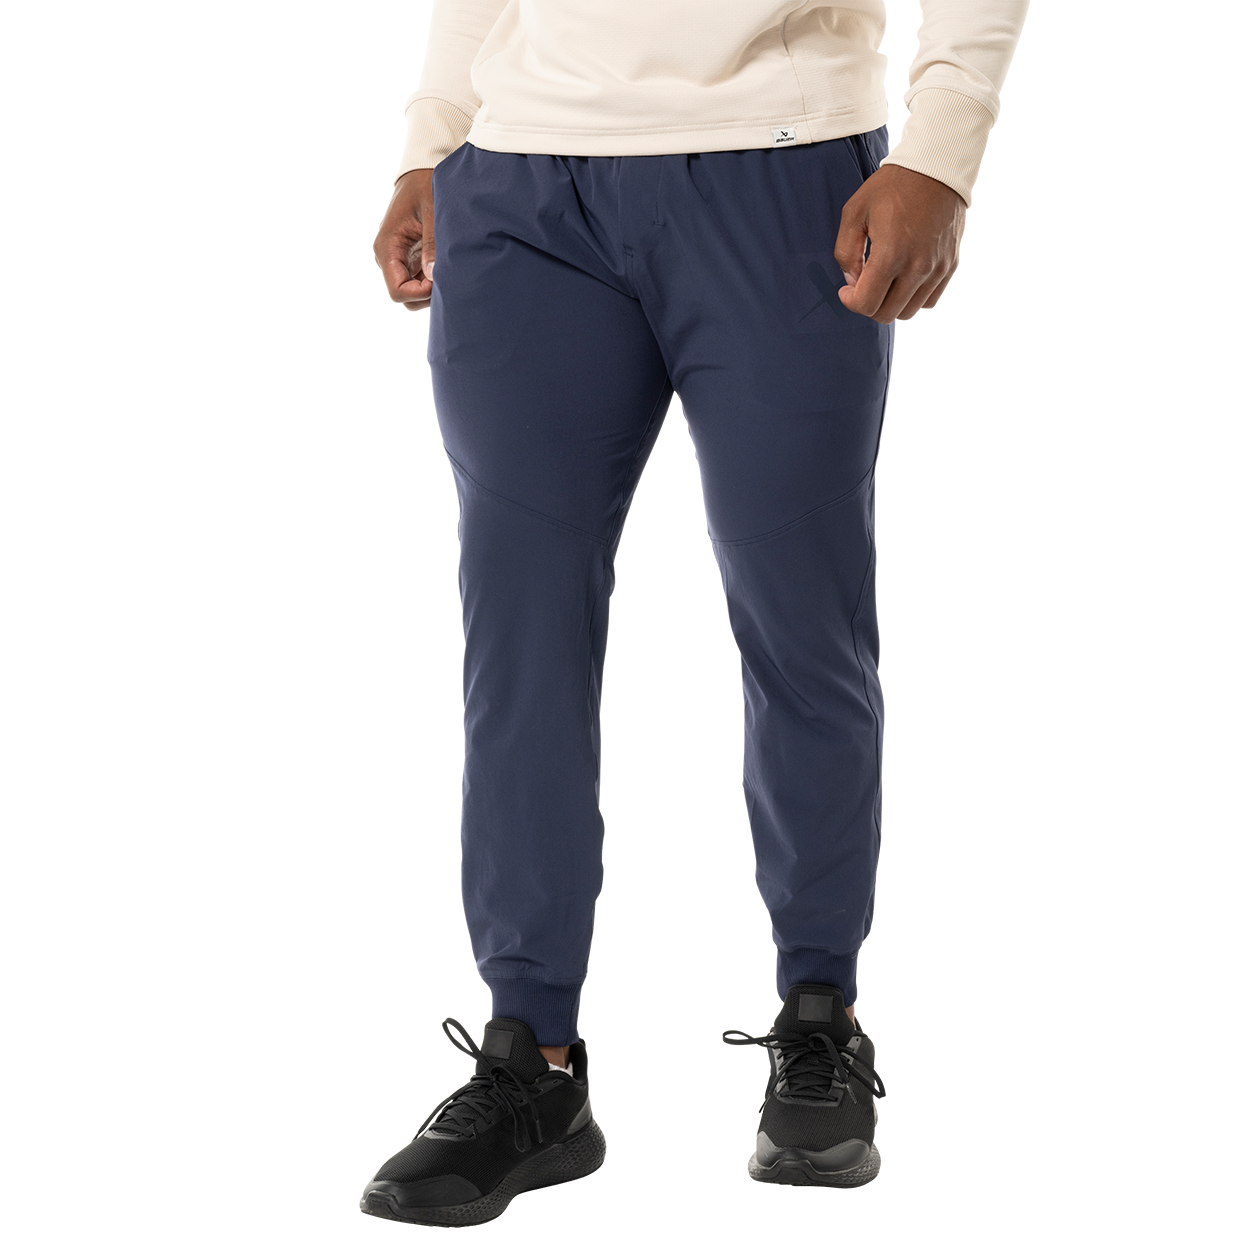 Women's Joggers with Pockets Lightweight Athletic Sweatpants - Navy Blue /  XS